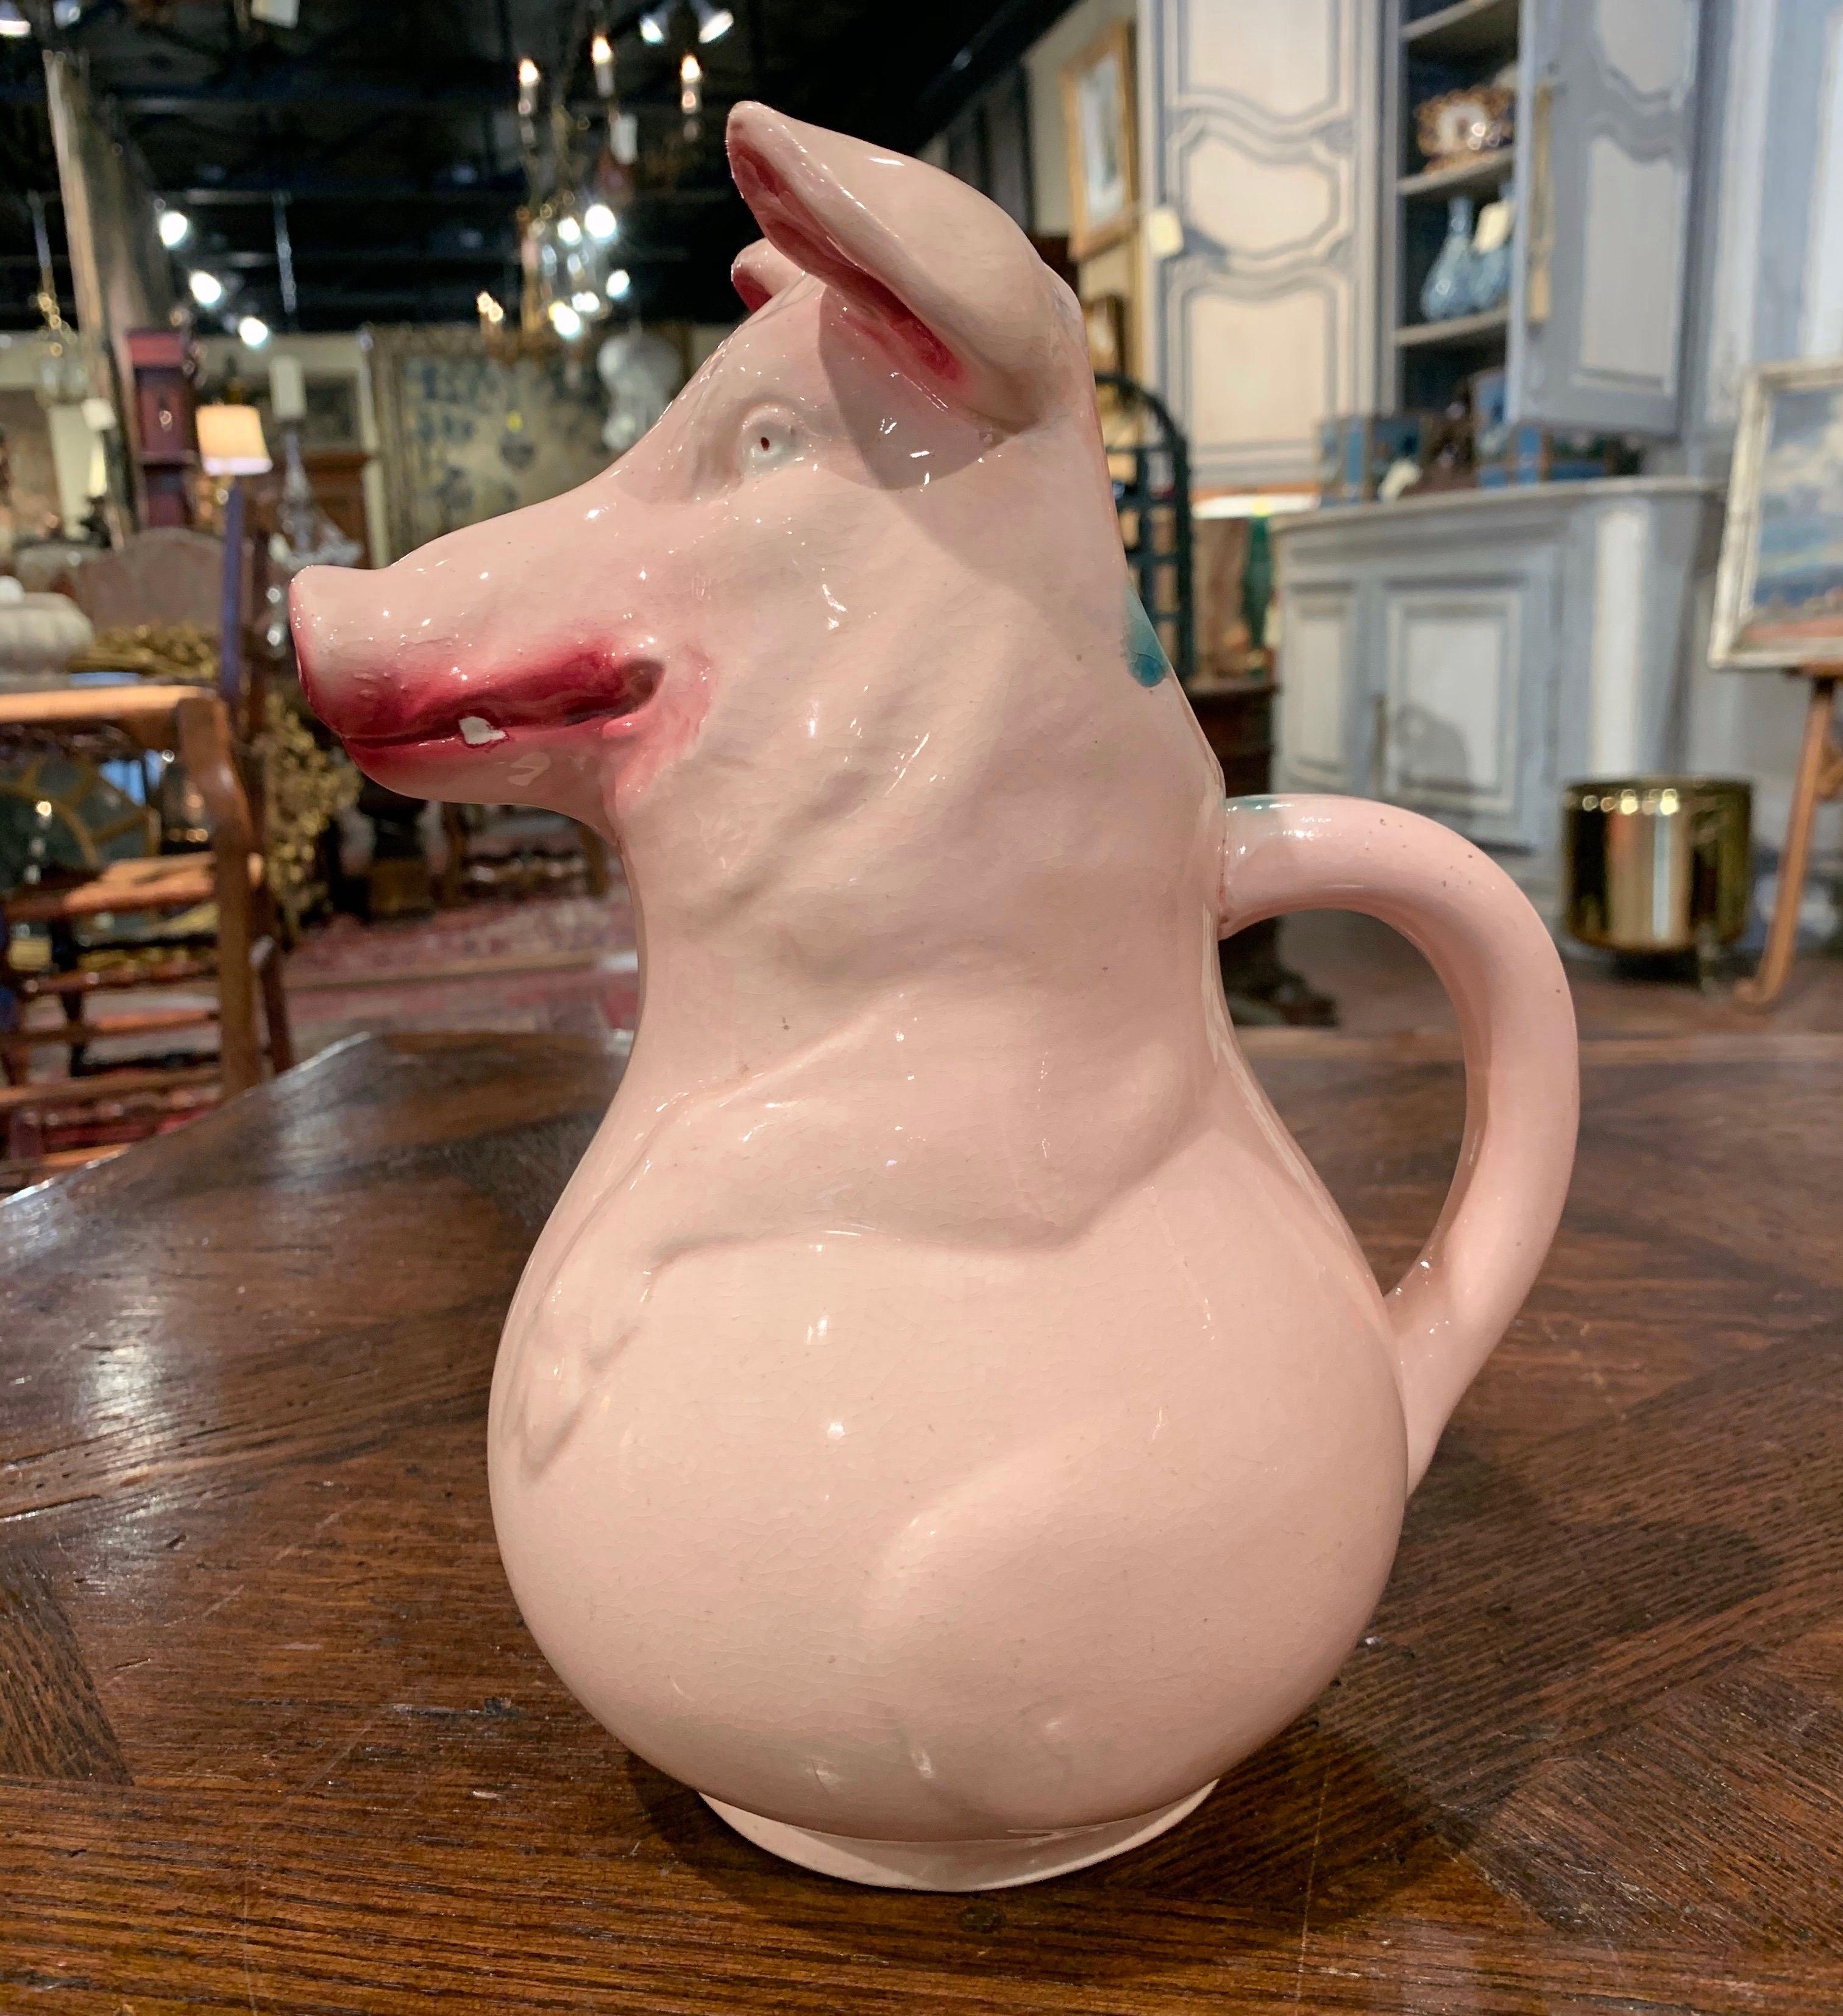 Decorate a shelf or a kitchen counter with this elegant antique barbotine pitcher. Created in Sarreguemines, France circa 1890, the pitcher depicts a smiling pig figure hand painted in a cream palette with pink nose and ears. The water jug is in